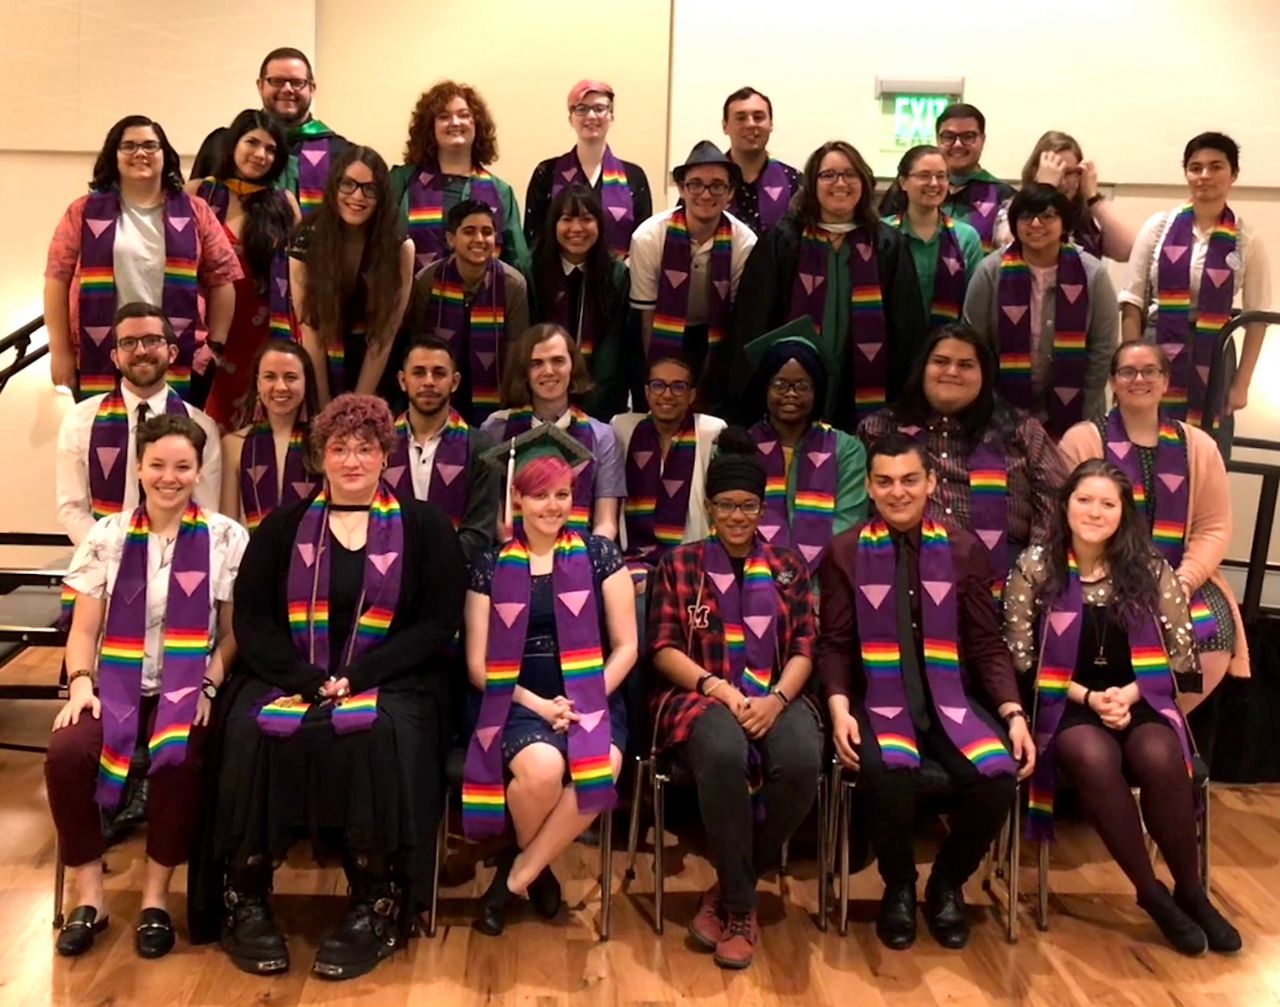 Pictured are students who participated in UNT’s Lavender Graduation ceremony in April 2019. (Credit, Kathleen Hobson)